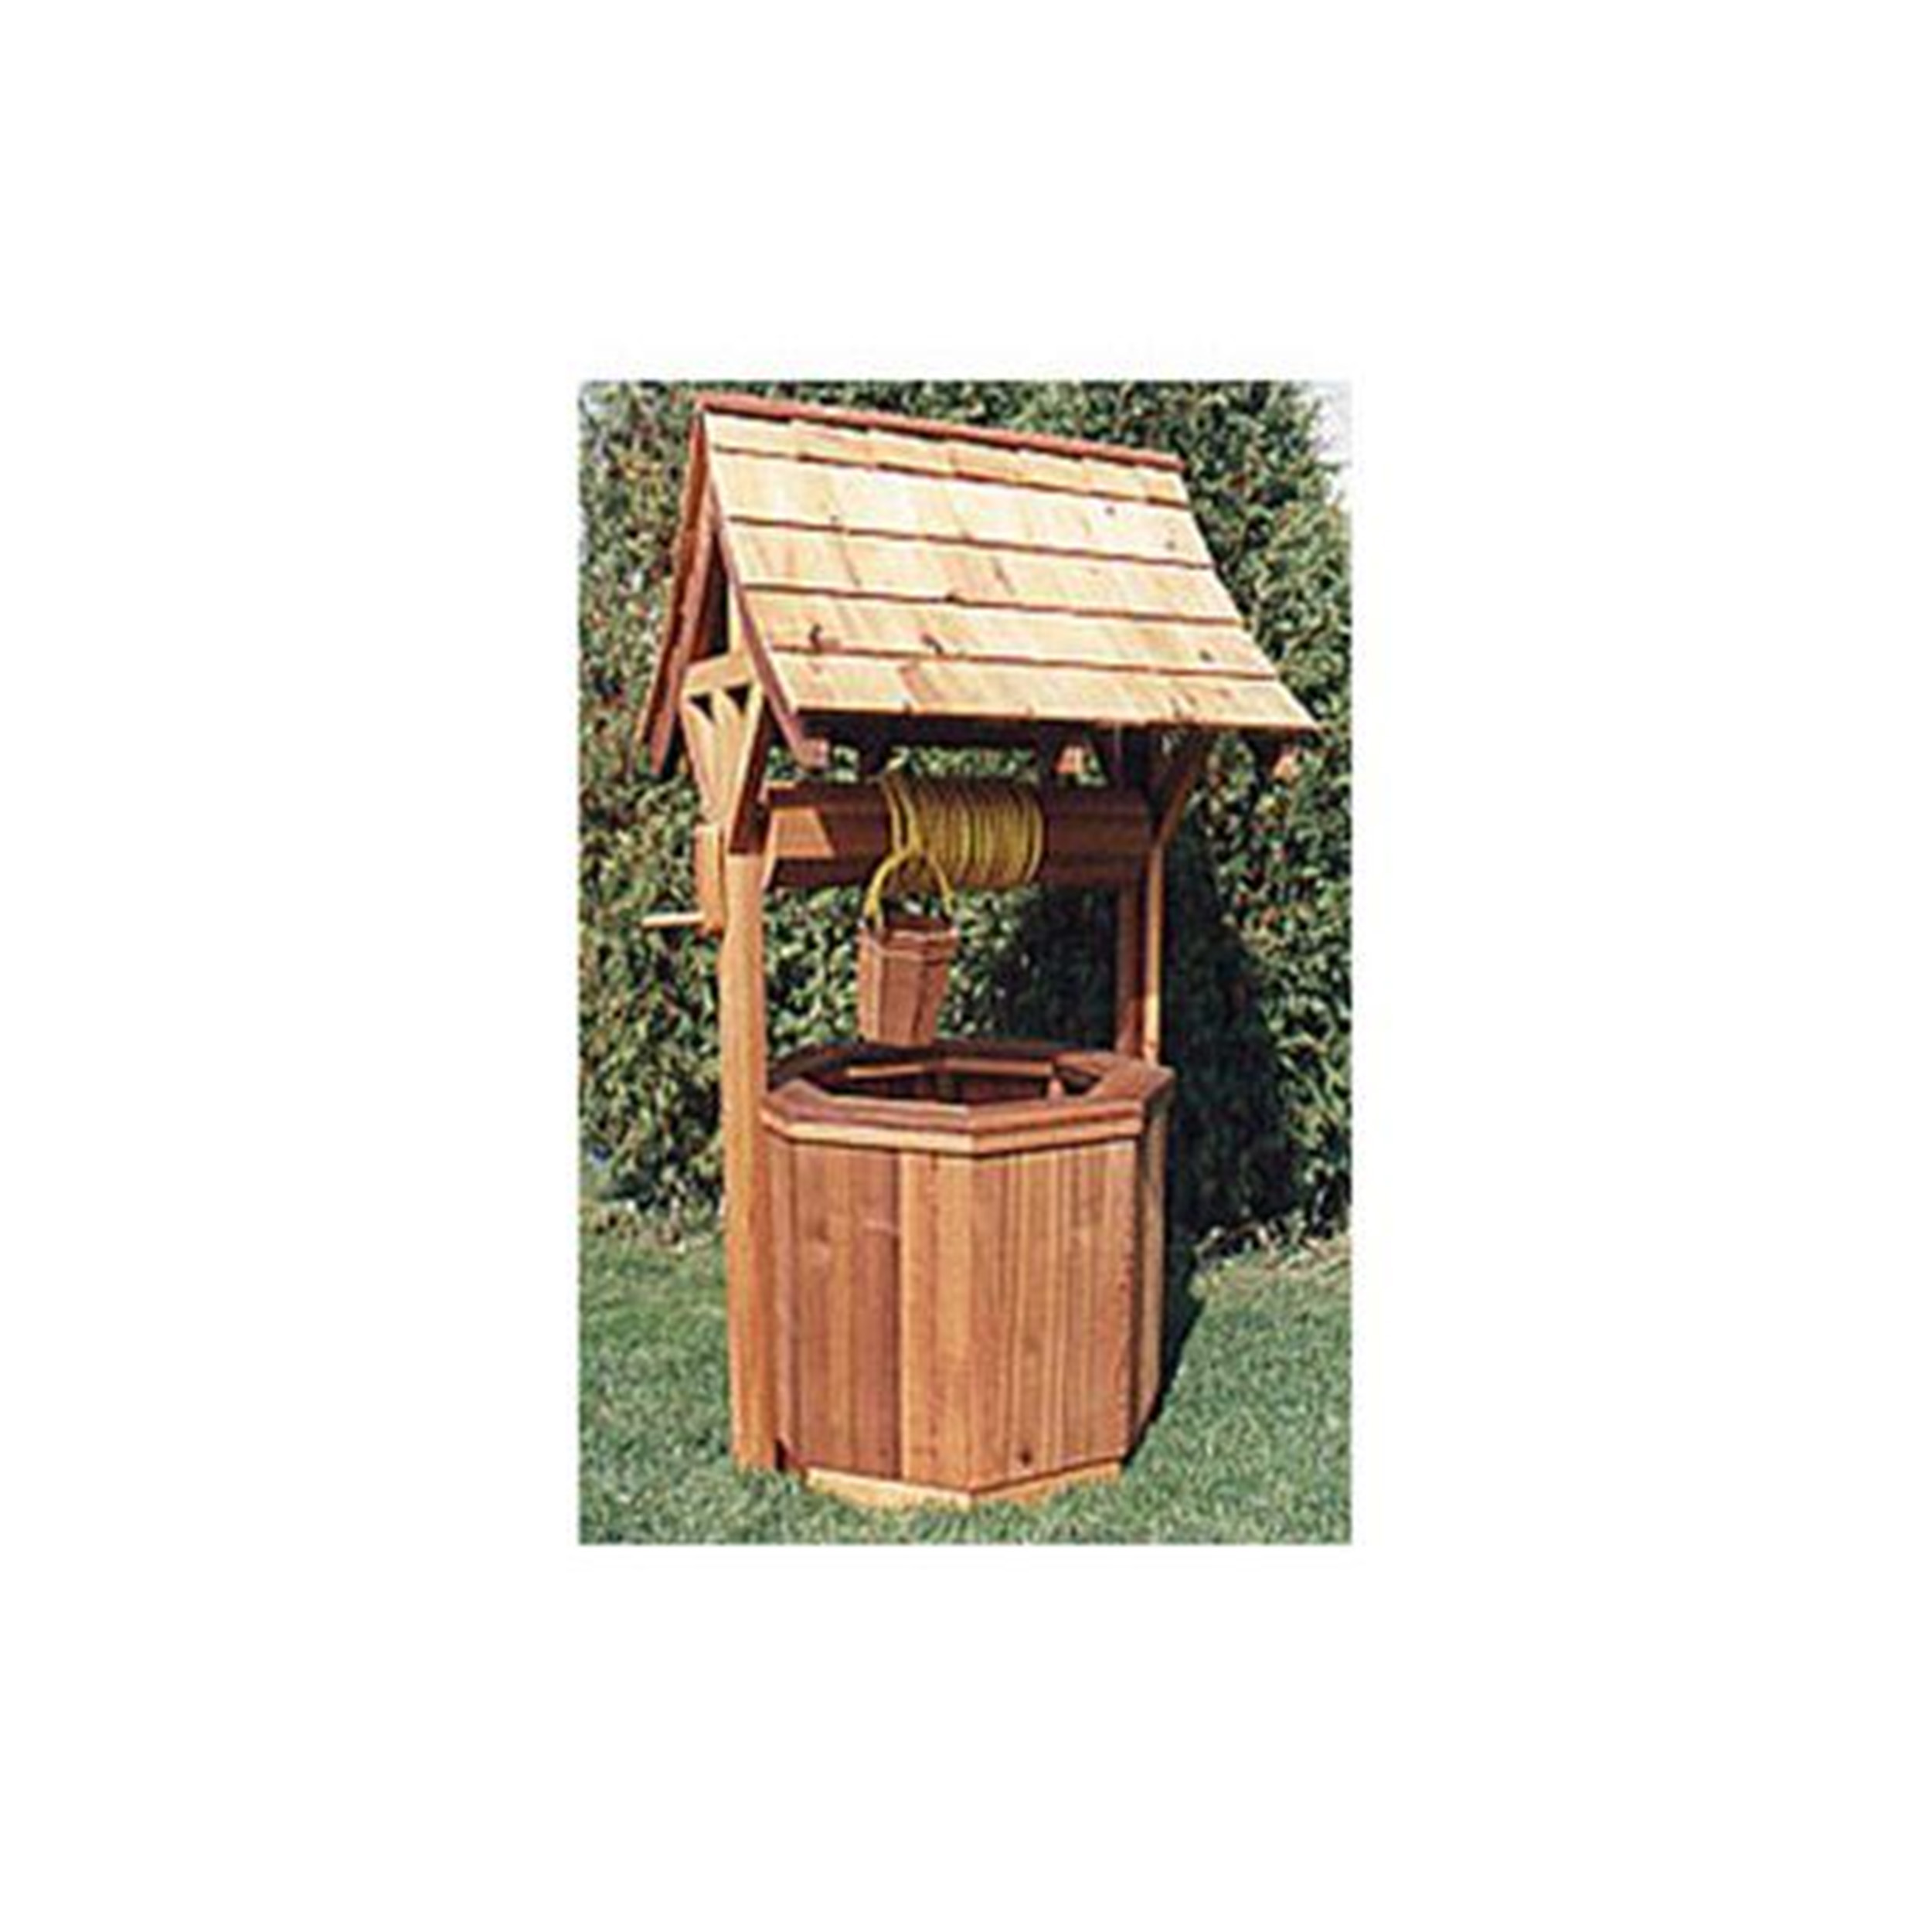 Woodworking Project Paper Plan To Build Mystic Wishing Well